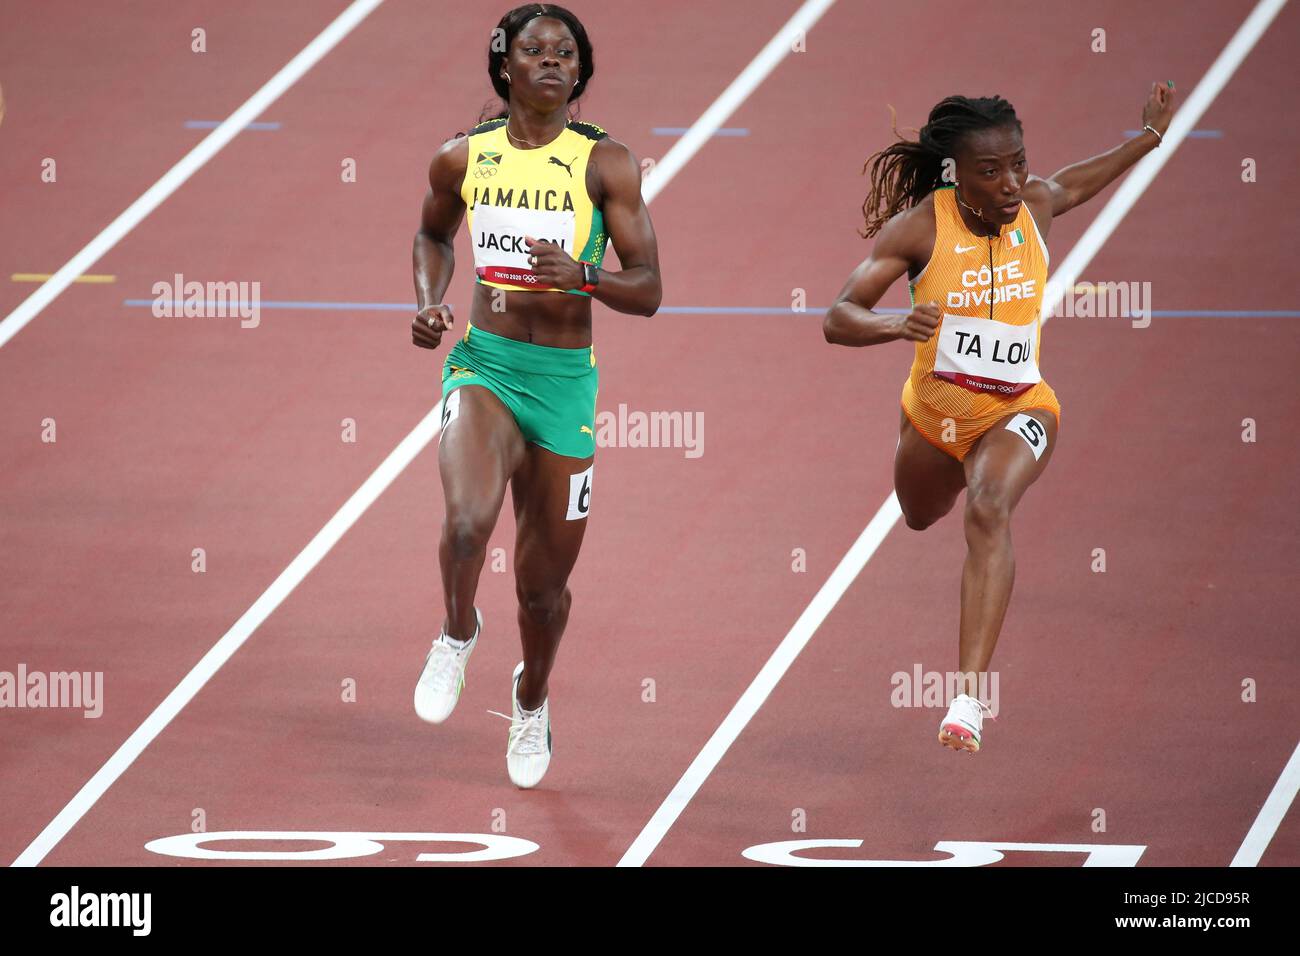 JULY 31st, 2021 - TOKYO, JAPAN: Shericka Jackson of Jamaica and Marie-Josee Ta Lou of Ivory Coast in action during the Women's 100m Semi-Finals at the Stock Photo